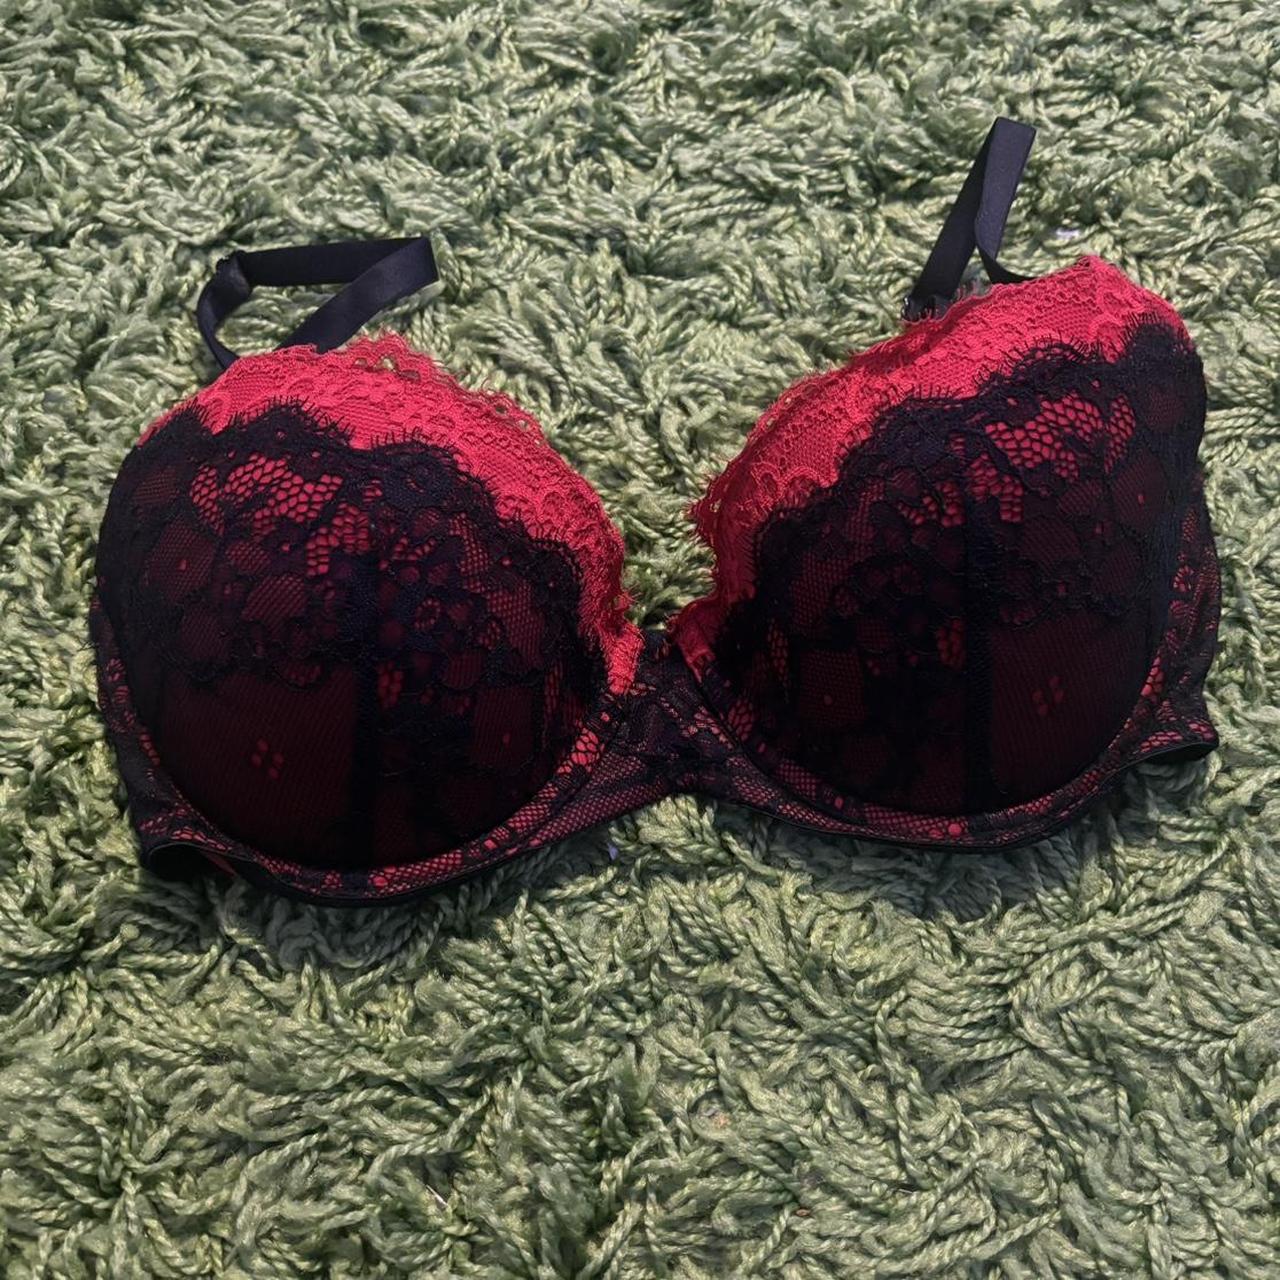 Vamp bra tried on once too small for me 10DD bra - Depop